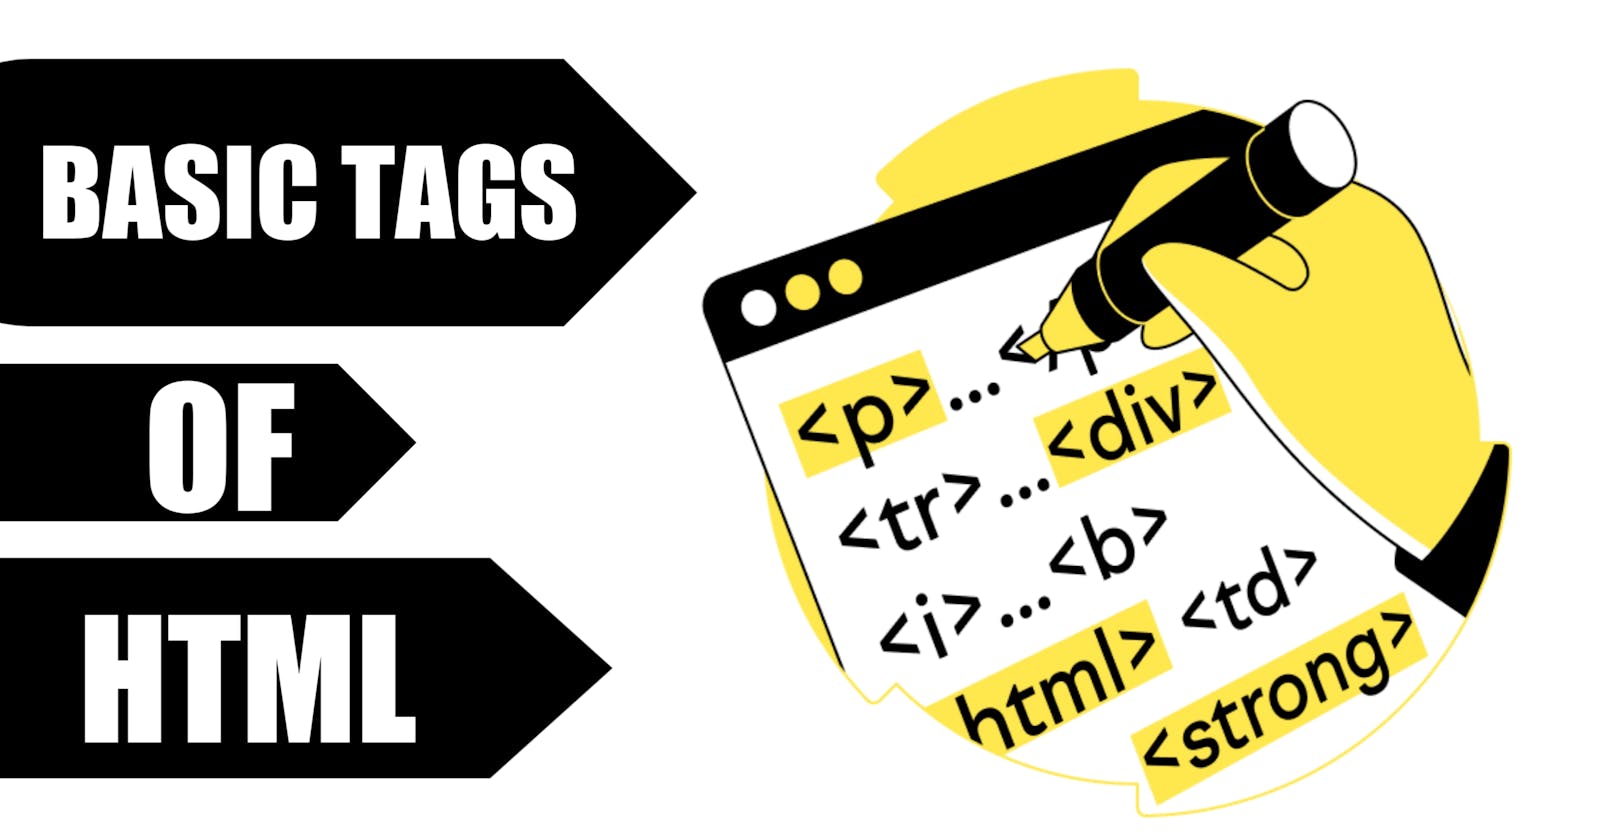 Basic Tags Of Html🏷️